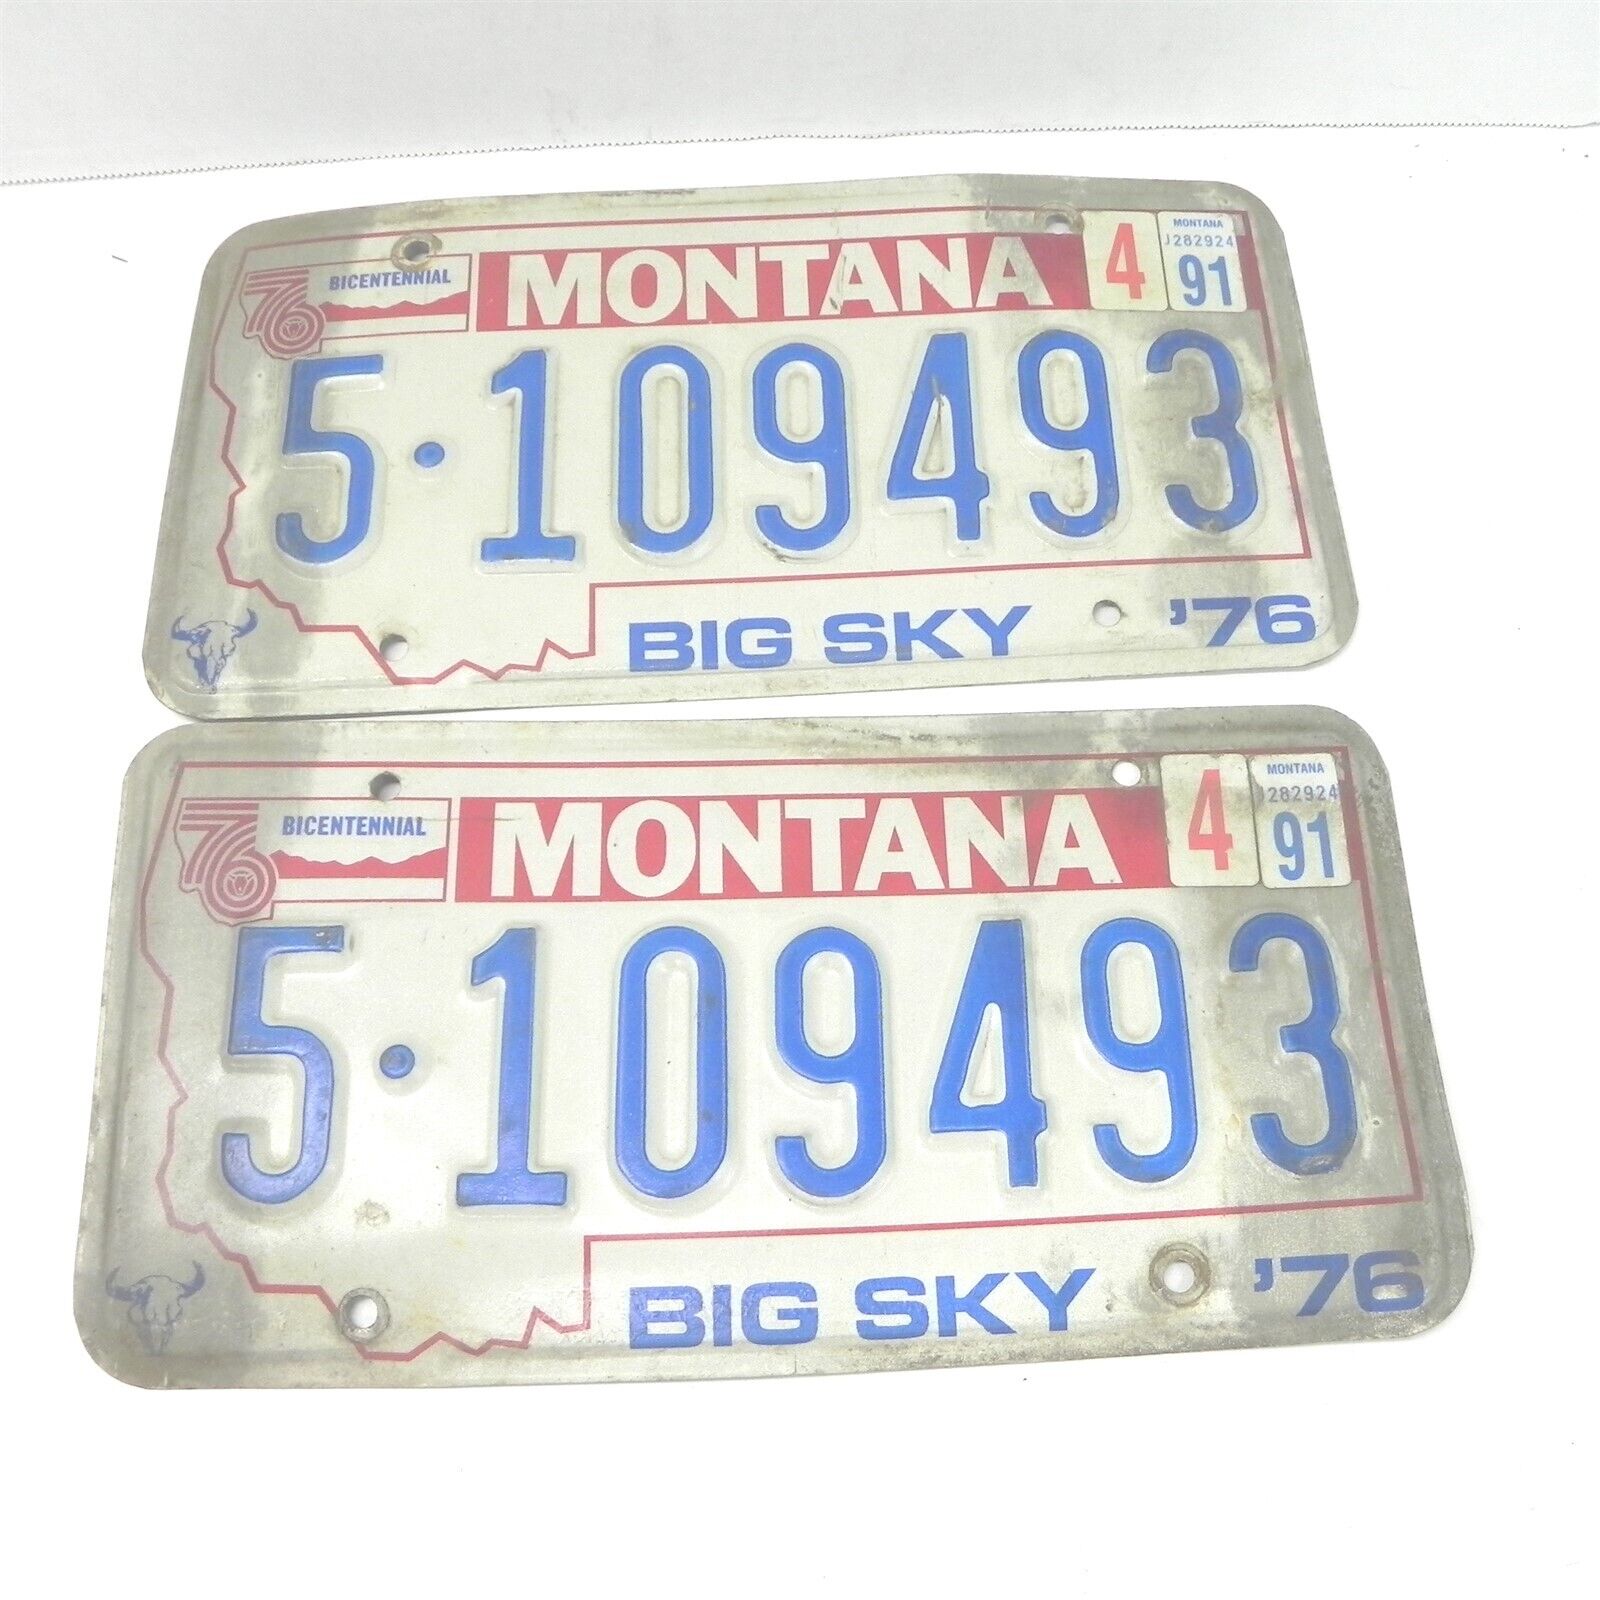 VINTAGE MONTANA BIG SKY LICENSE PLATE SET 5109493 COLLECTIBLE WHITE AND BLUE 